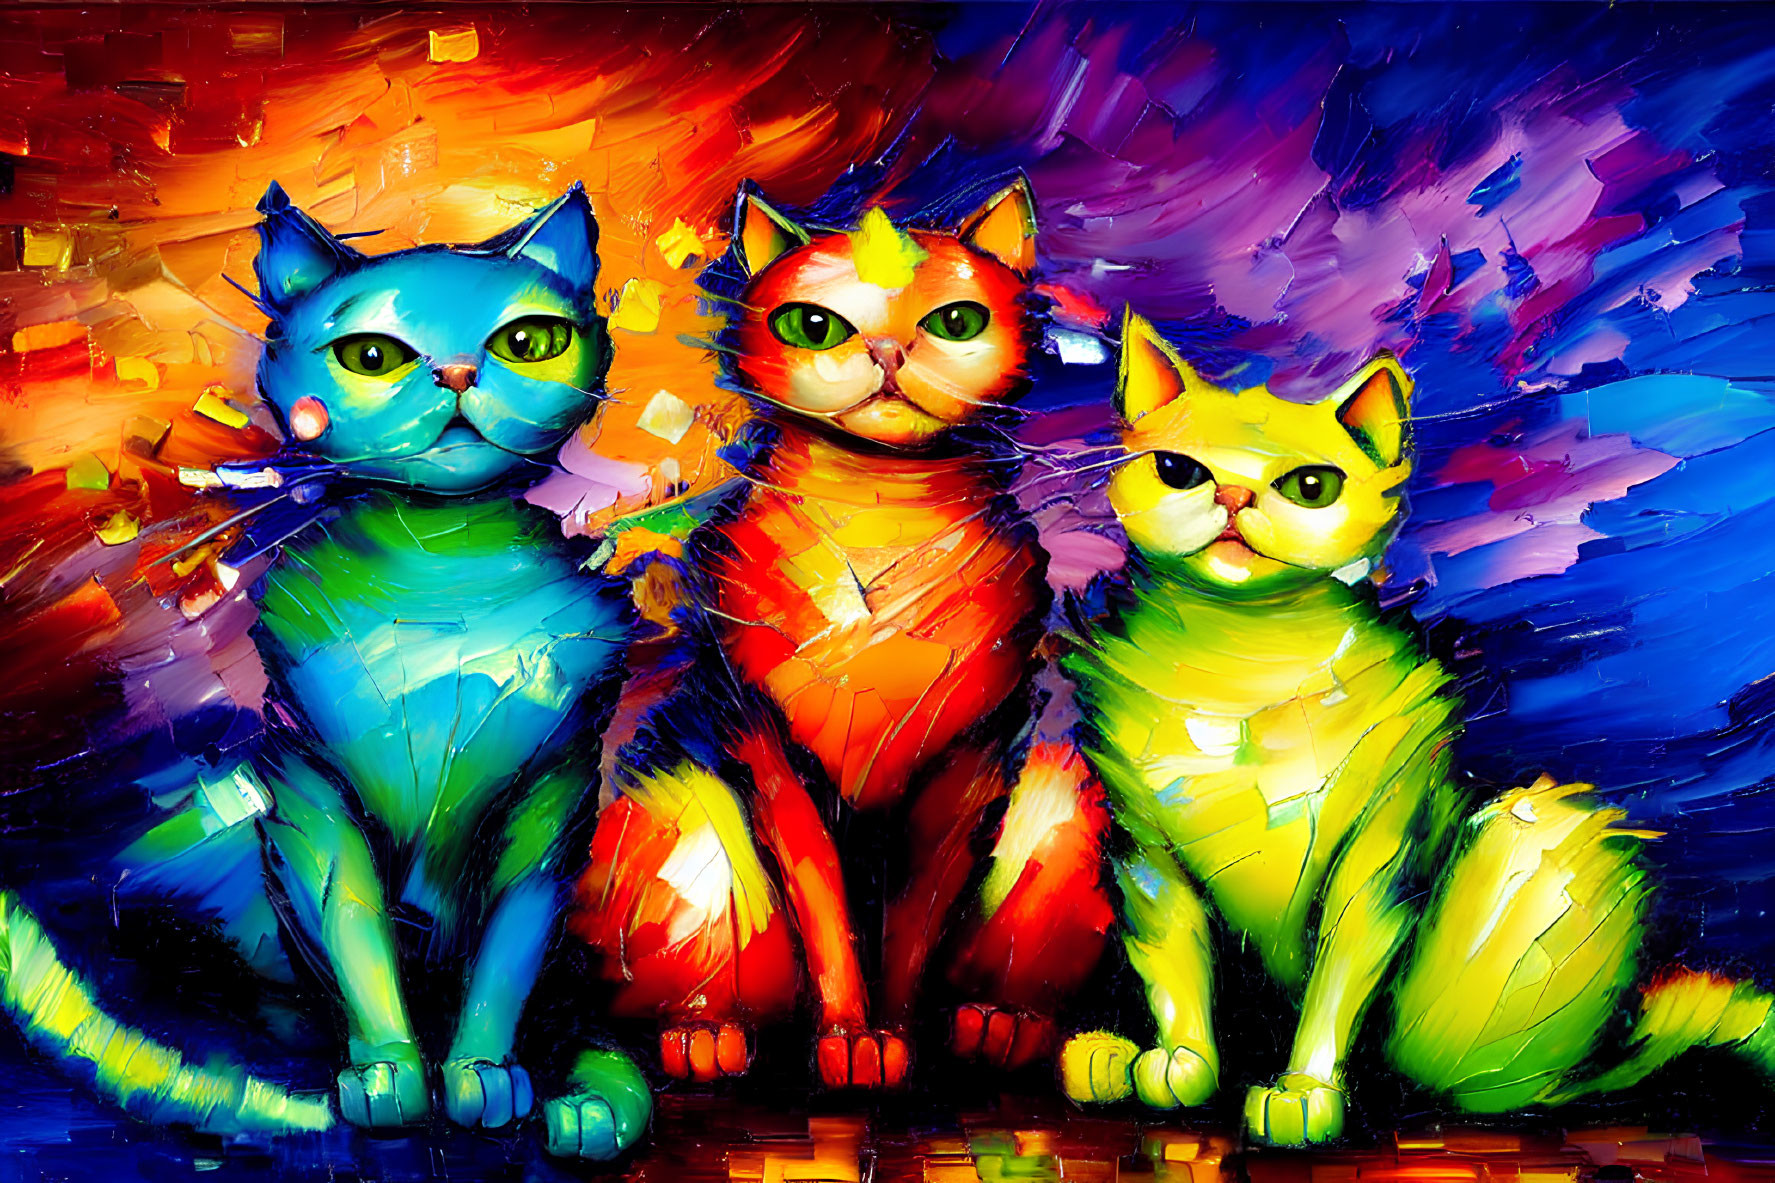 Abstract colorful cat paintings with vibrant brush strokes.